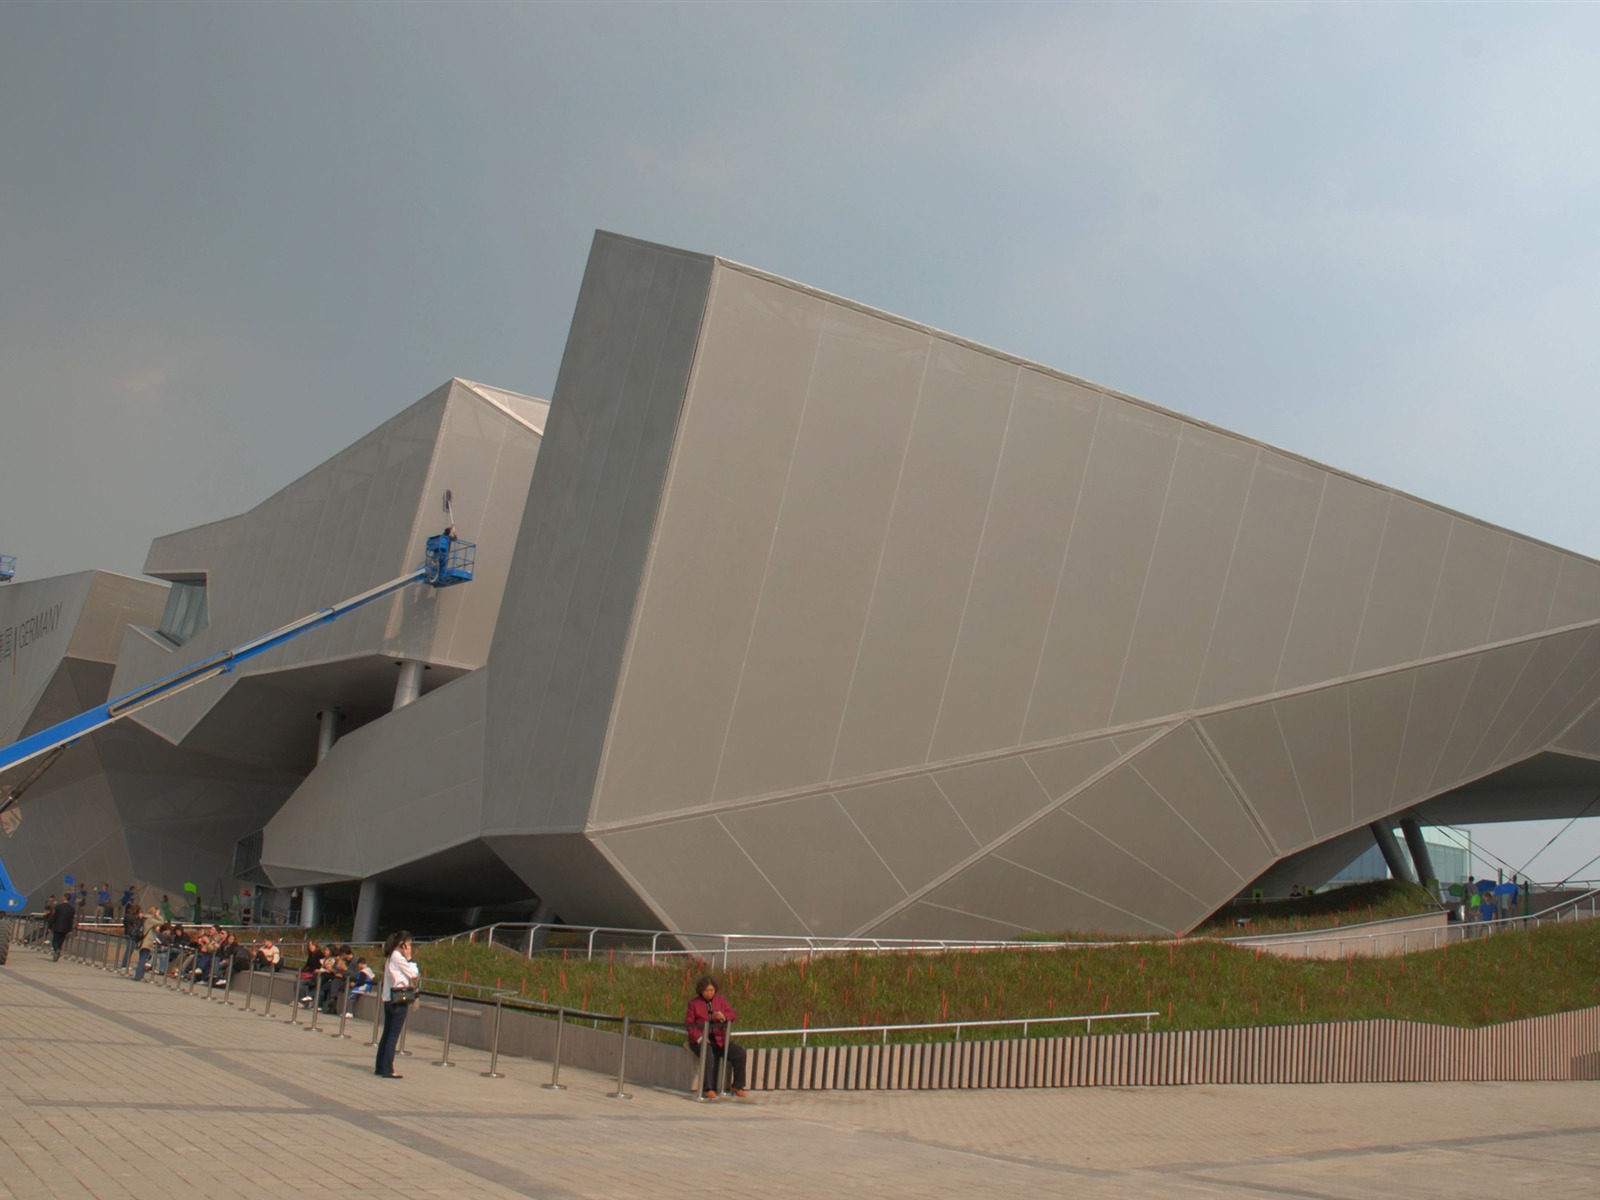 Commissioning of the 2010 Shanghai World Expo (studious works) #21 - 1600x1200